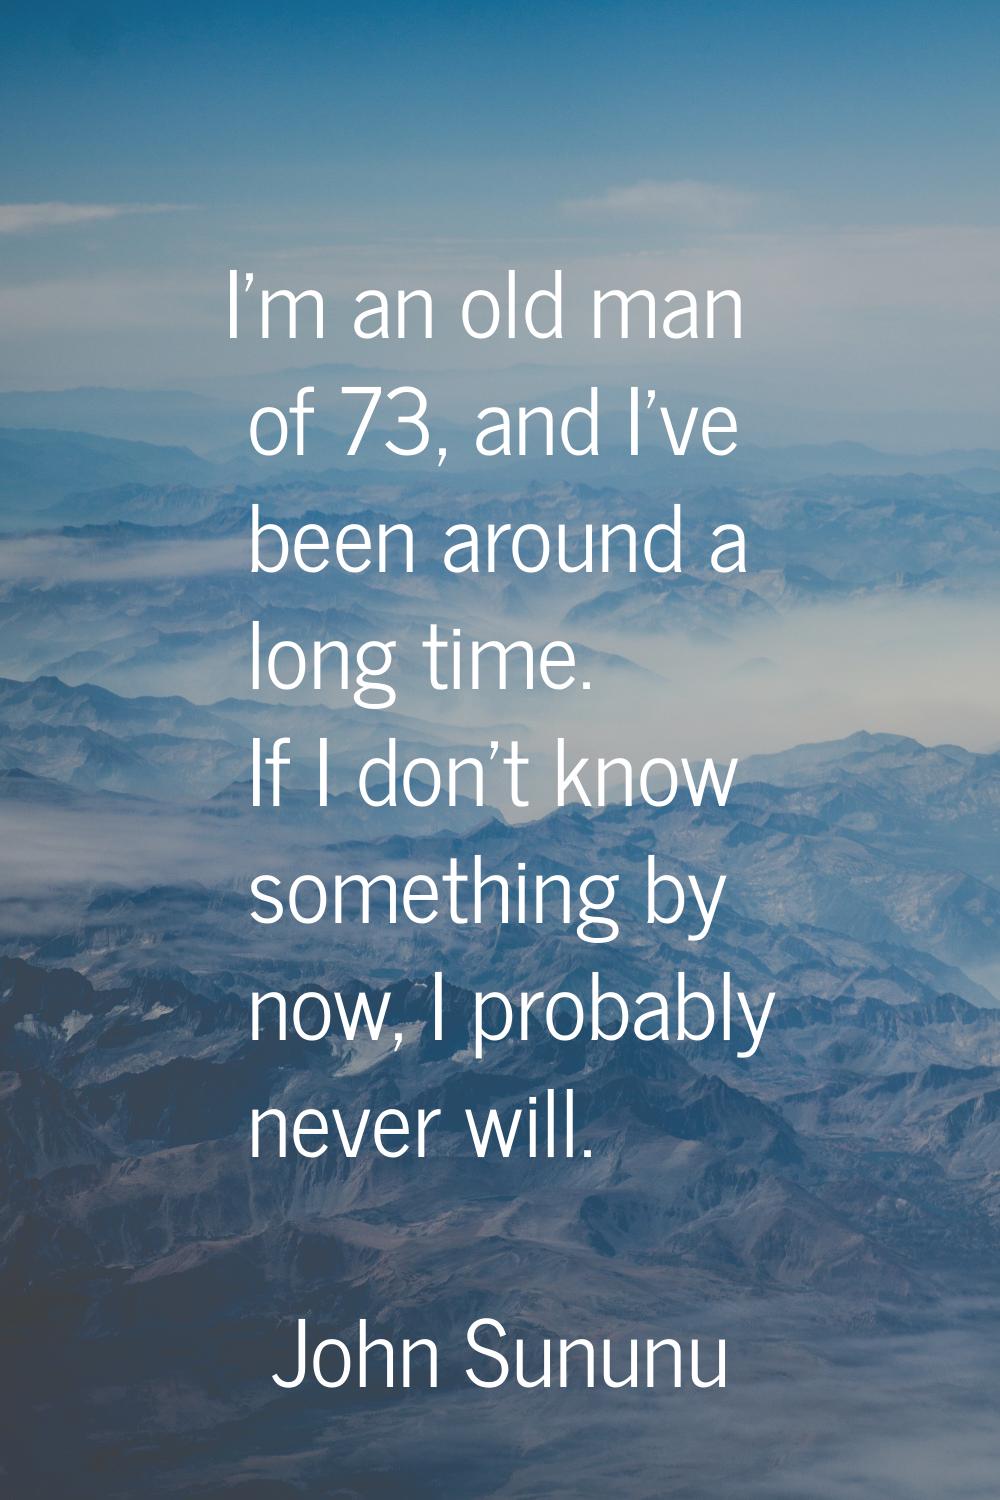 I'm an old man of 73, and I've been around a long time. If I don't know something by now, I probabl